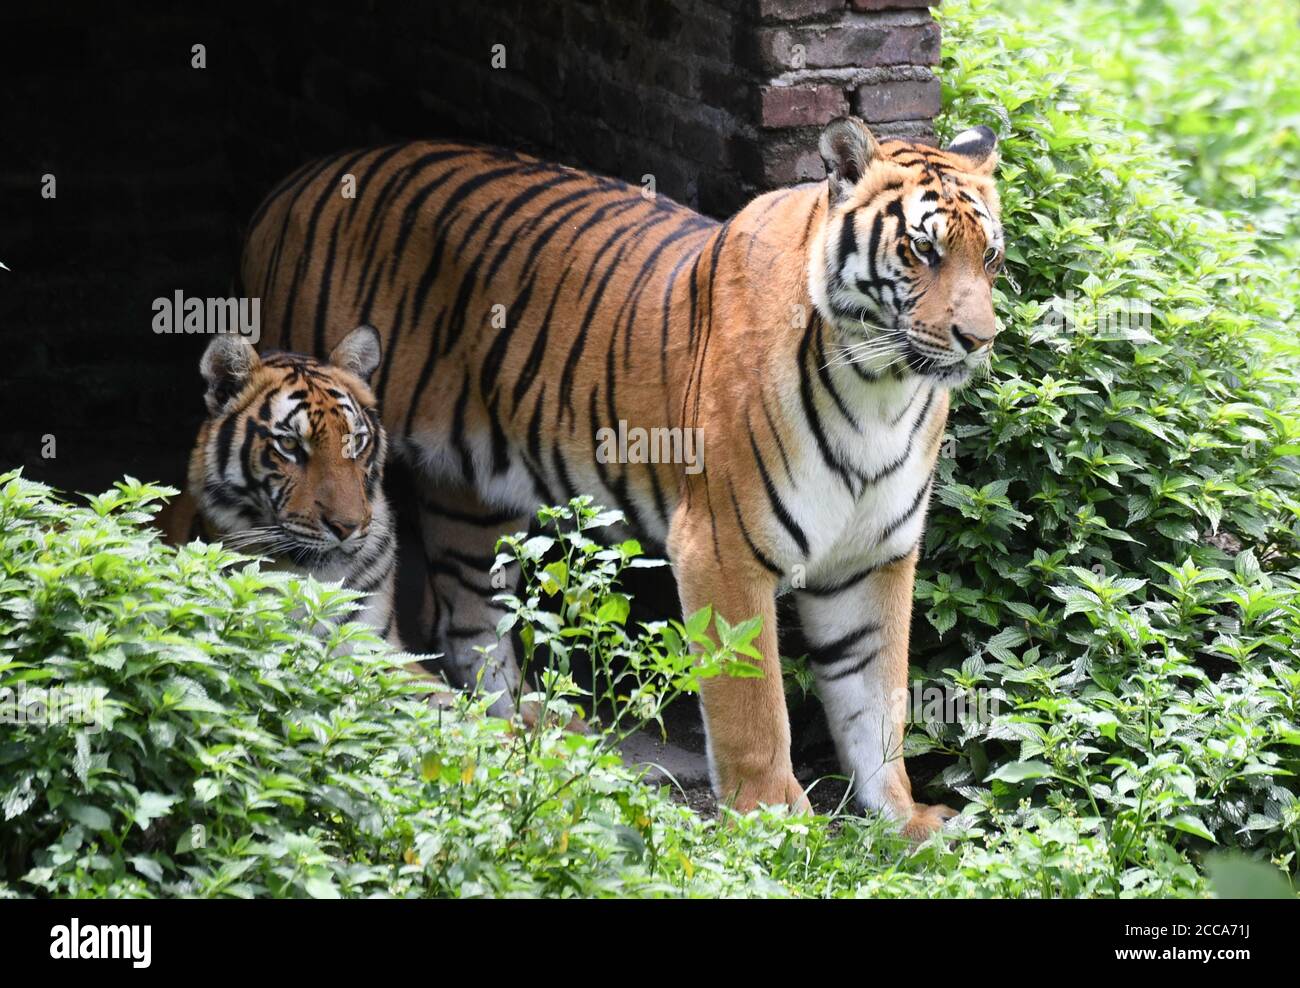 Longyan, China's Fujian Province. 19th Aug, 2020. South China Tigers are seen in the Meihua Mountains Nature Reserve in Longyan, southeast China's Fujian Province, Aug. 19, 2020. Meihua Mountains is known as the home of the South China Tiger, one of the world's most endangered animals. Credit: Lin Shanchuan/Xinhua/Alamy Live News Stock Photo